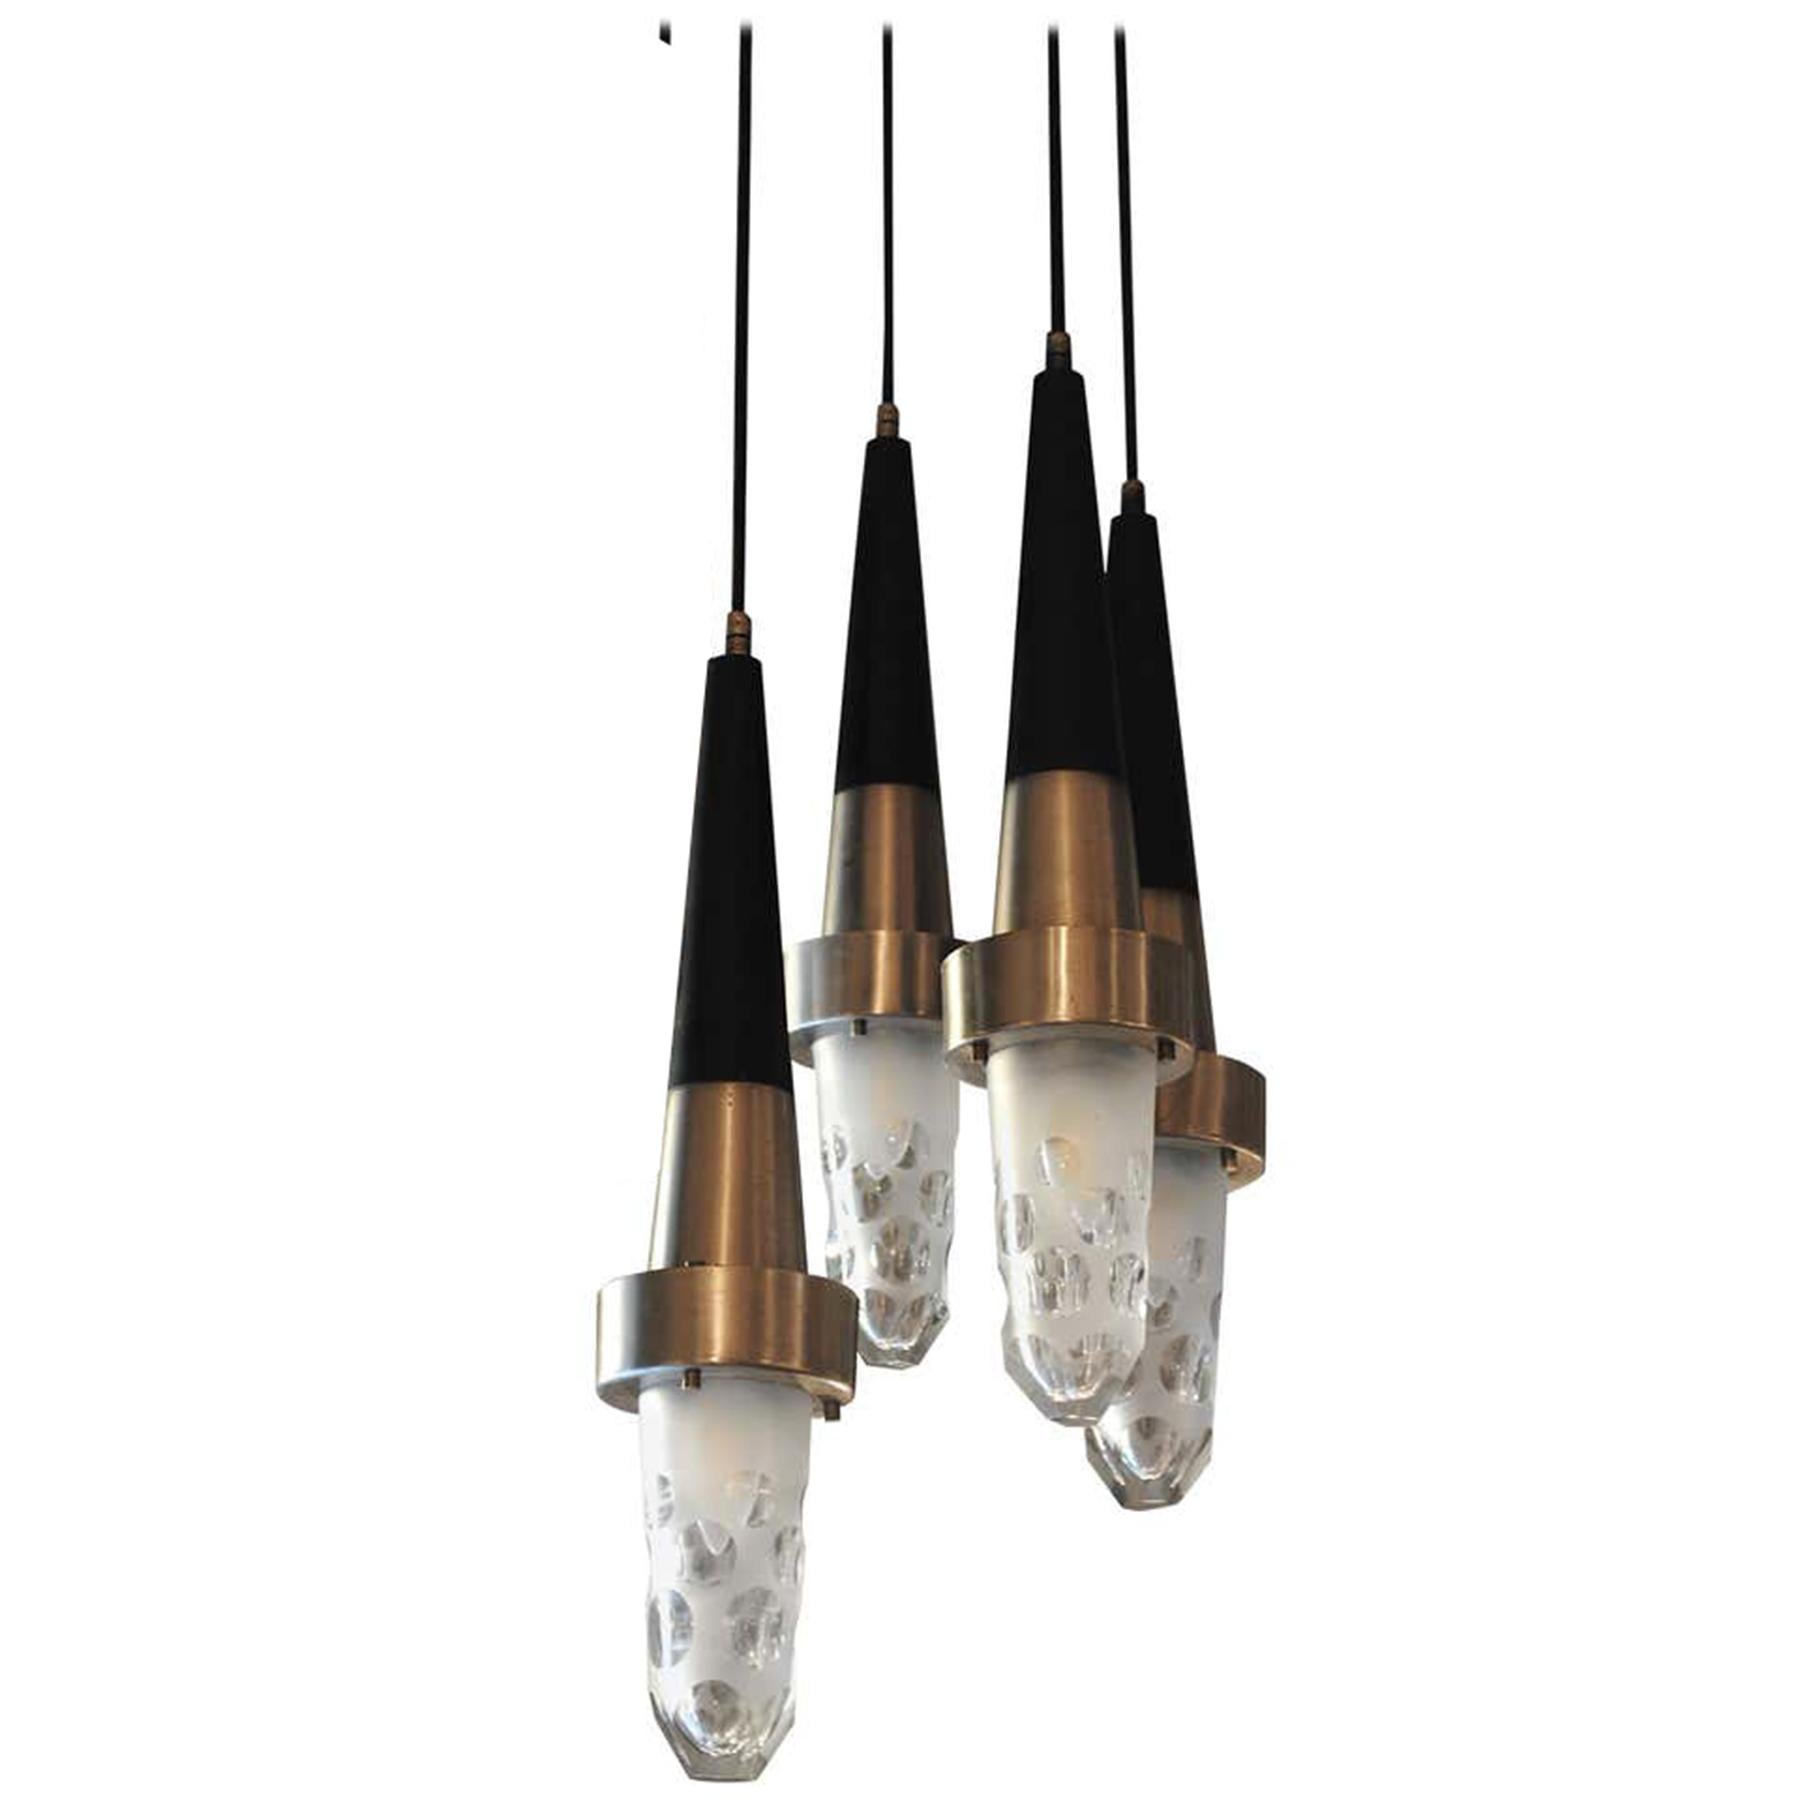 Suspension composed of 4 elements pendant in steel and frosted glass production Stilnovo Style 50's. The elements can have different heights.